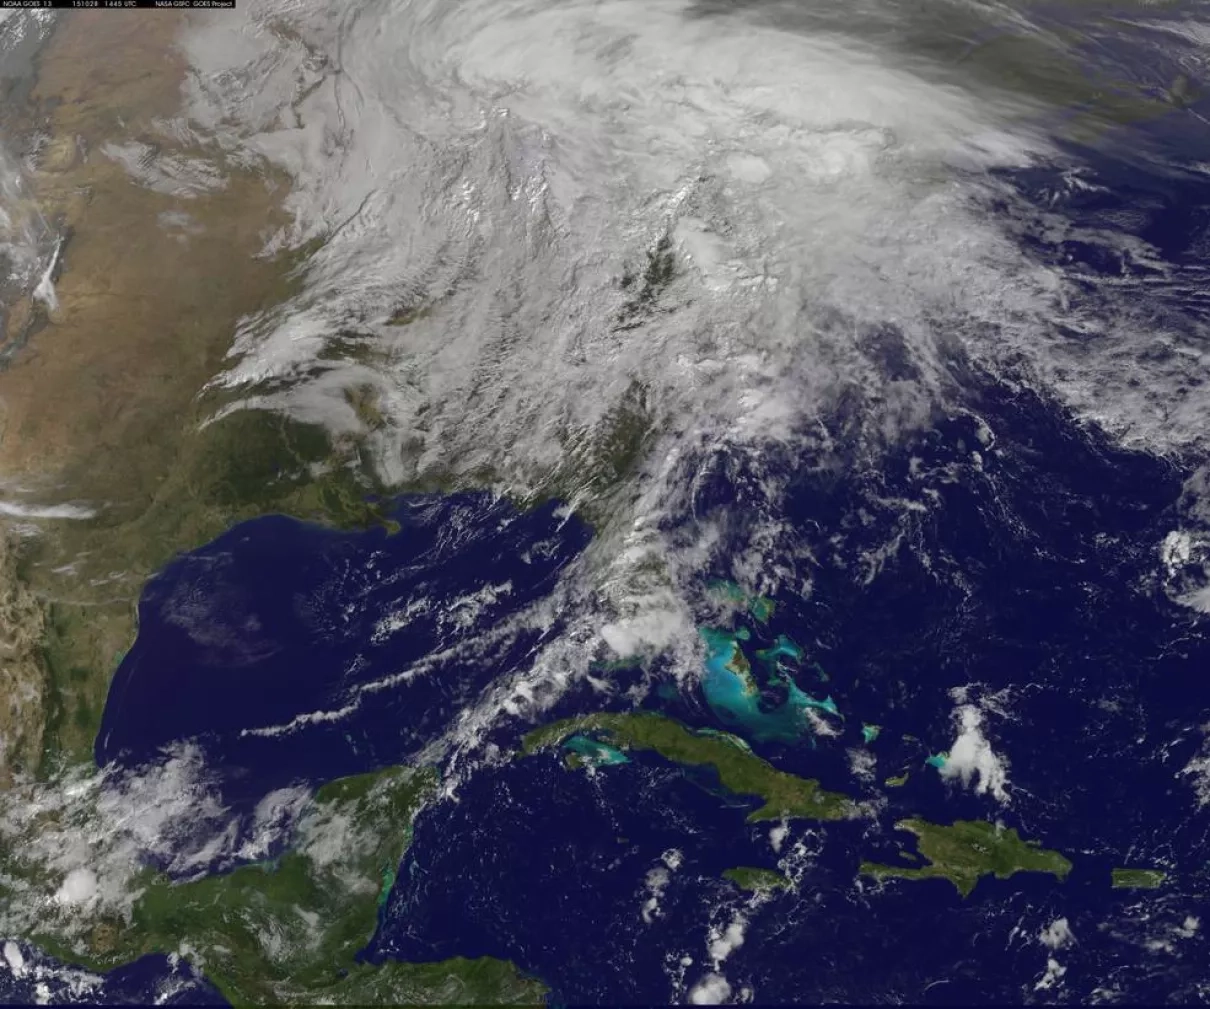 This visible image of the clouds associated with the low pressure area containing remnants of Hurricane Patricia over the U.S. Mid-Atlantic and northeast was taken from NOAA's GOES-East satellite at 1445 UTC (10:45 a.m. EDT). Credits: NASA/NOAA GOES Project